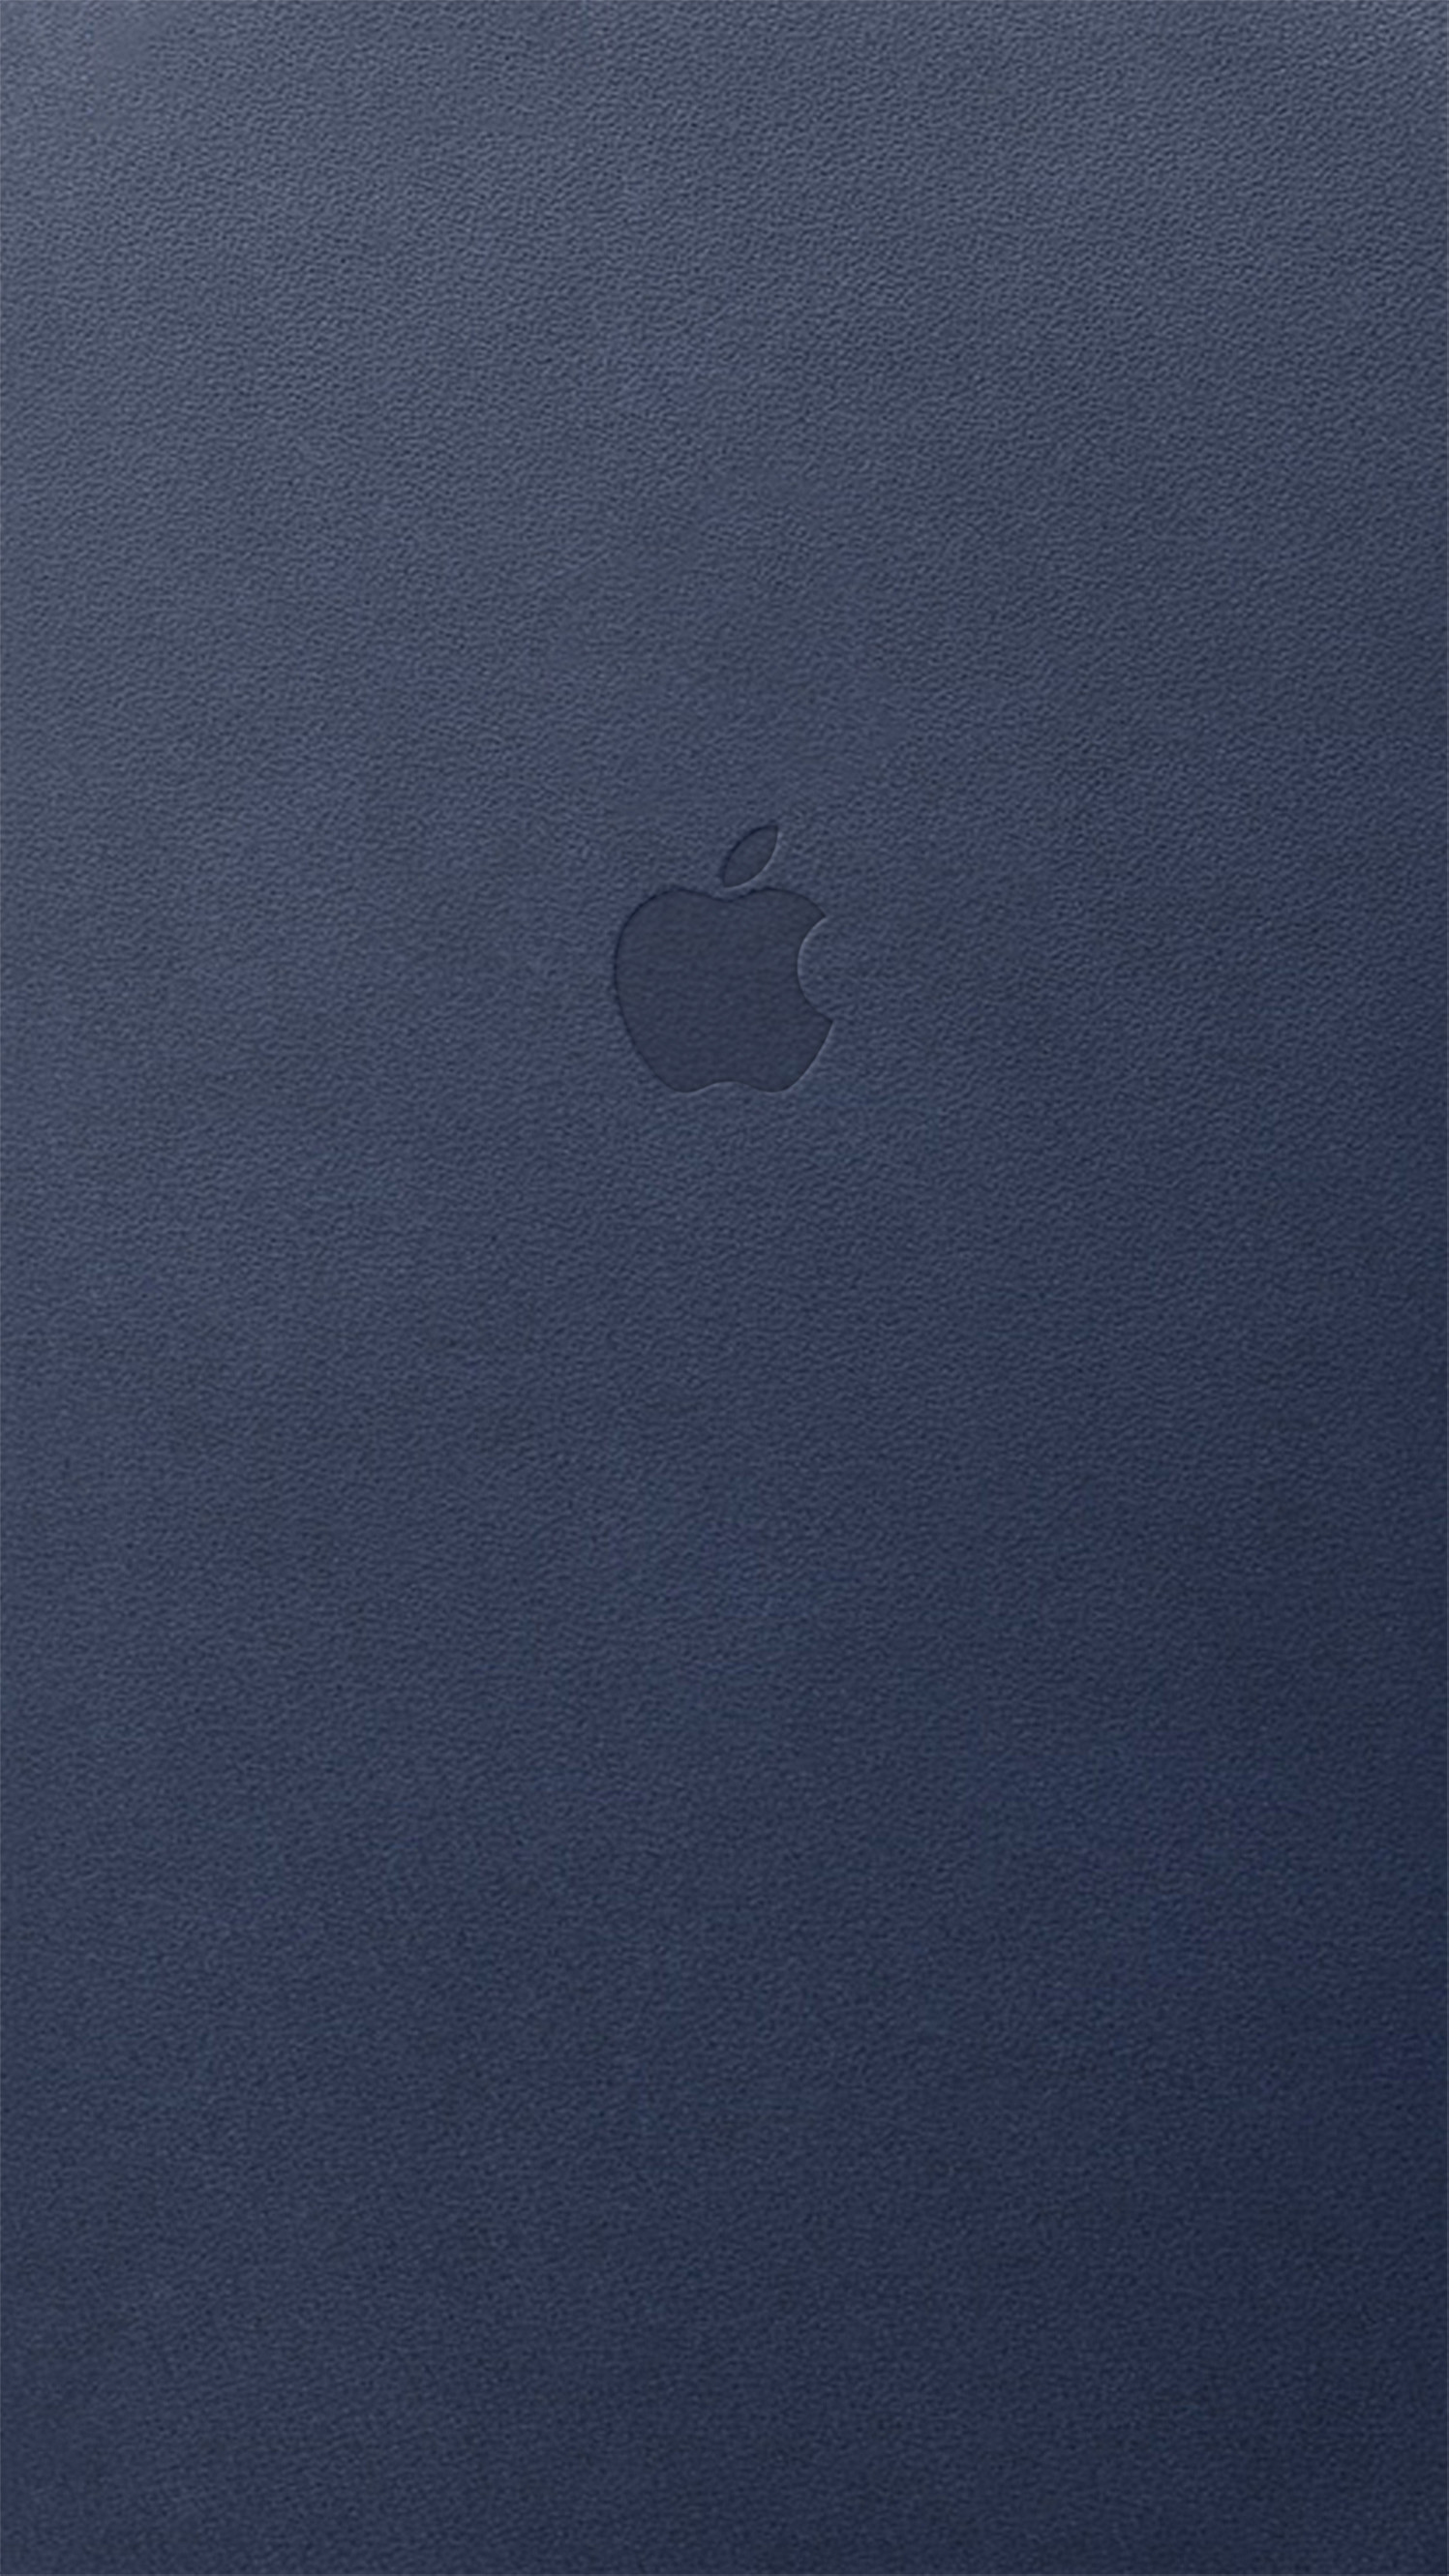 Download Midnight Blue iPhone. Product Red By JasonZigrino